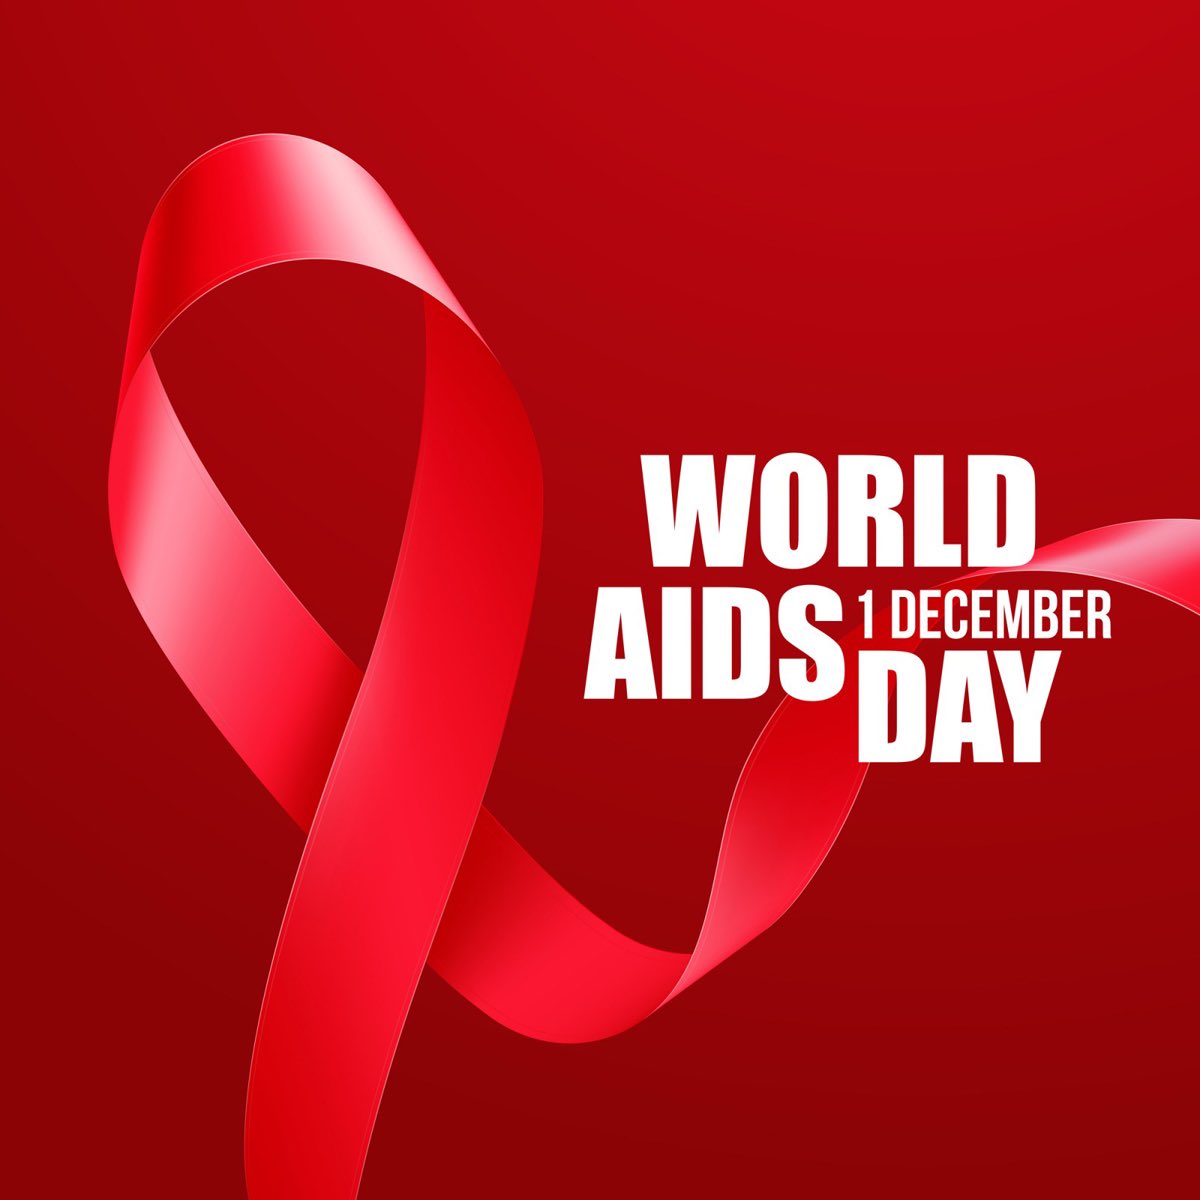 Today marks World AIDS day. Islanders who want to check their HIV status are invited to a free drop in clinic at the General Hospital Outpatient Department on Wed 4th Dec 9.30-11.30am & 12.30 -2.30pm. 
#WorldAIDSDay #HIVAwareness #knowyourstatus #preventHIV